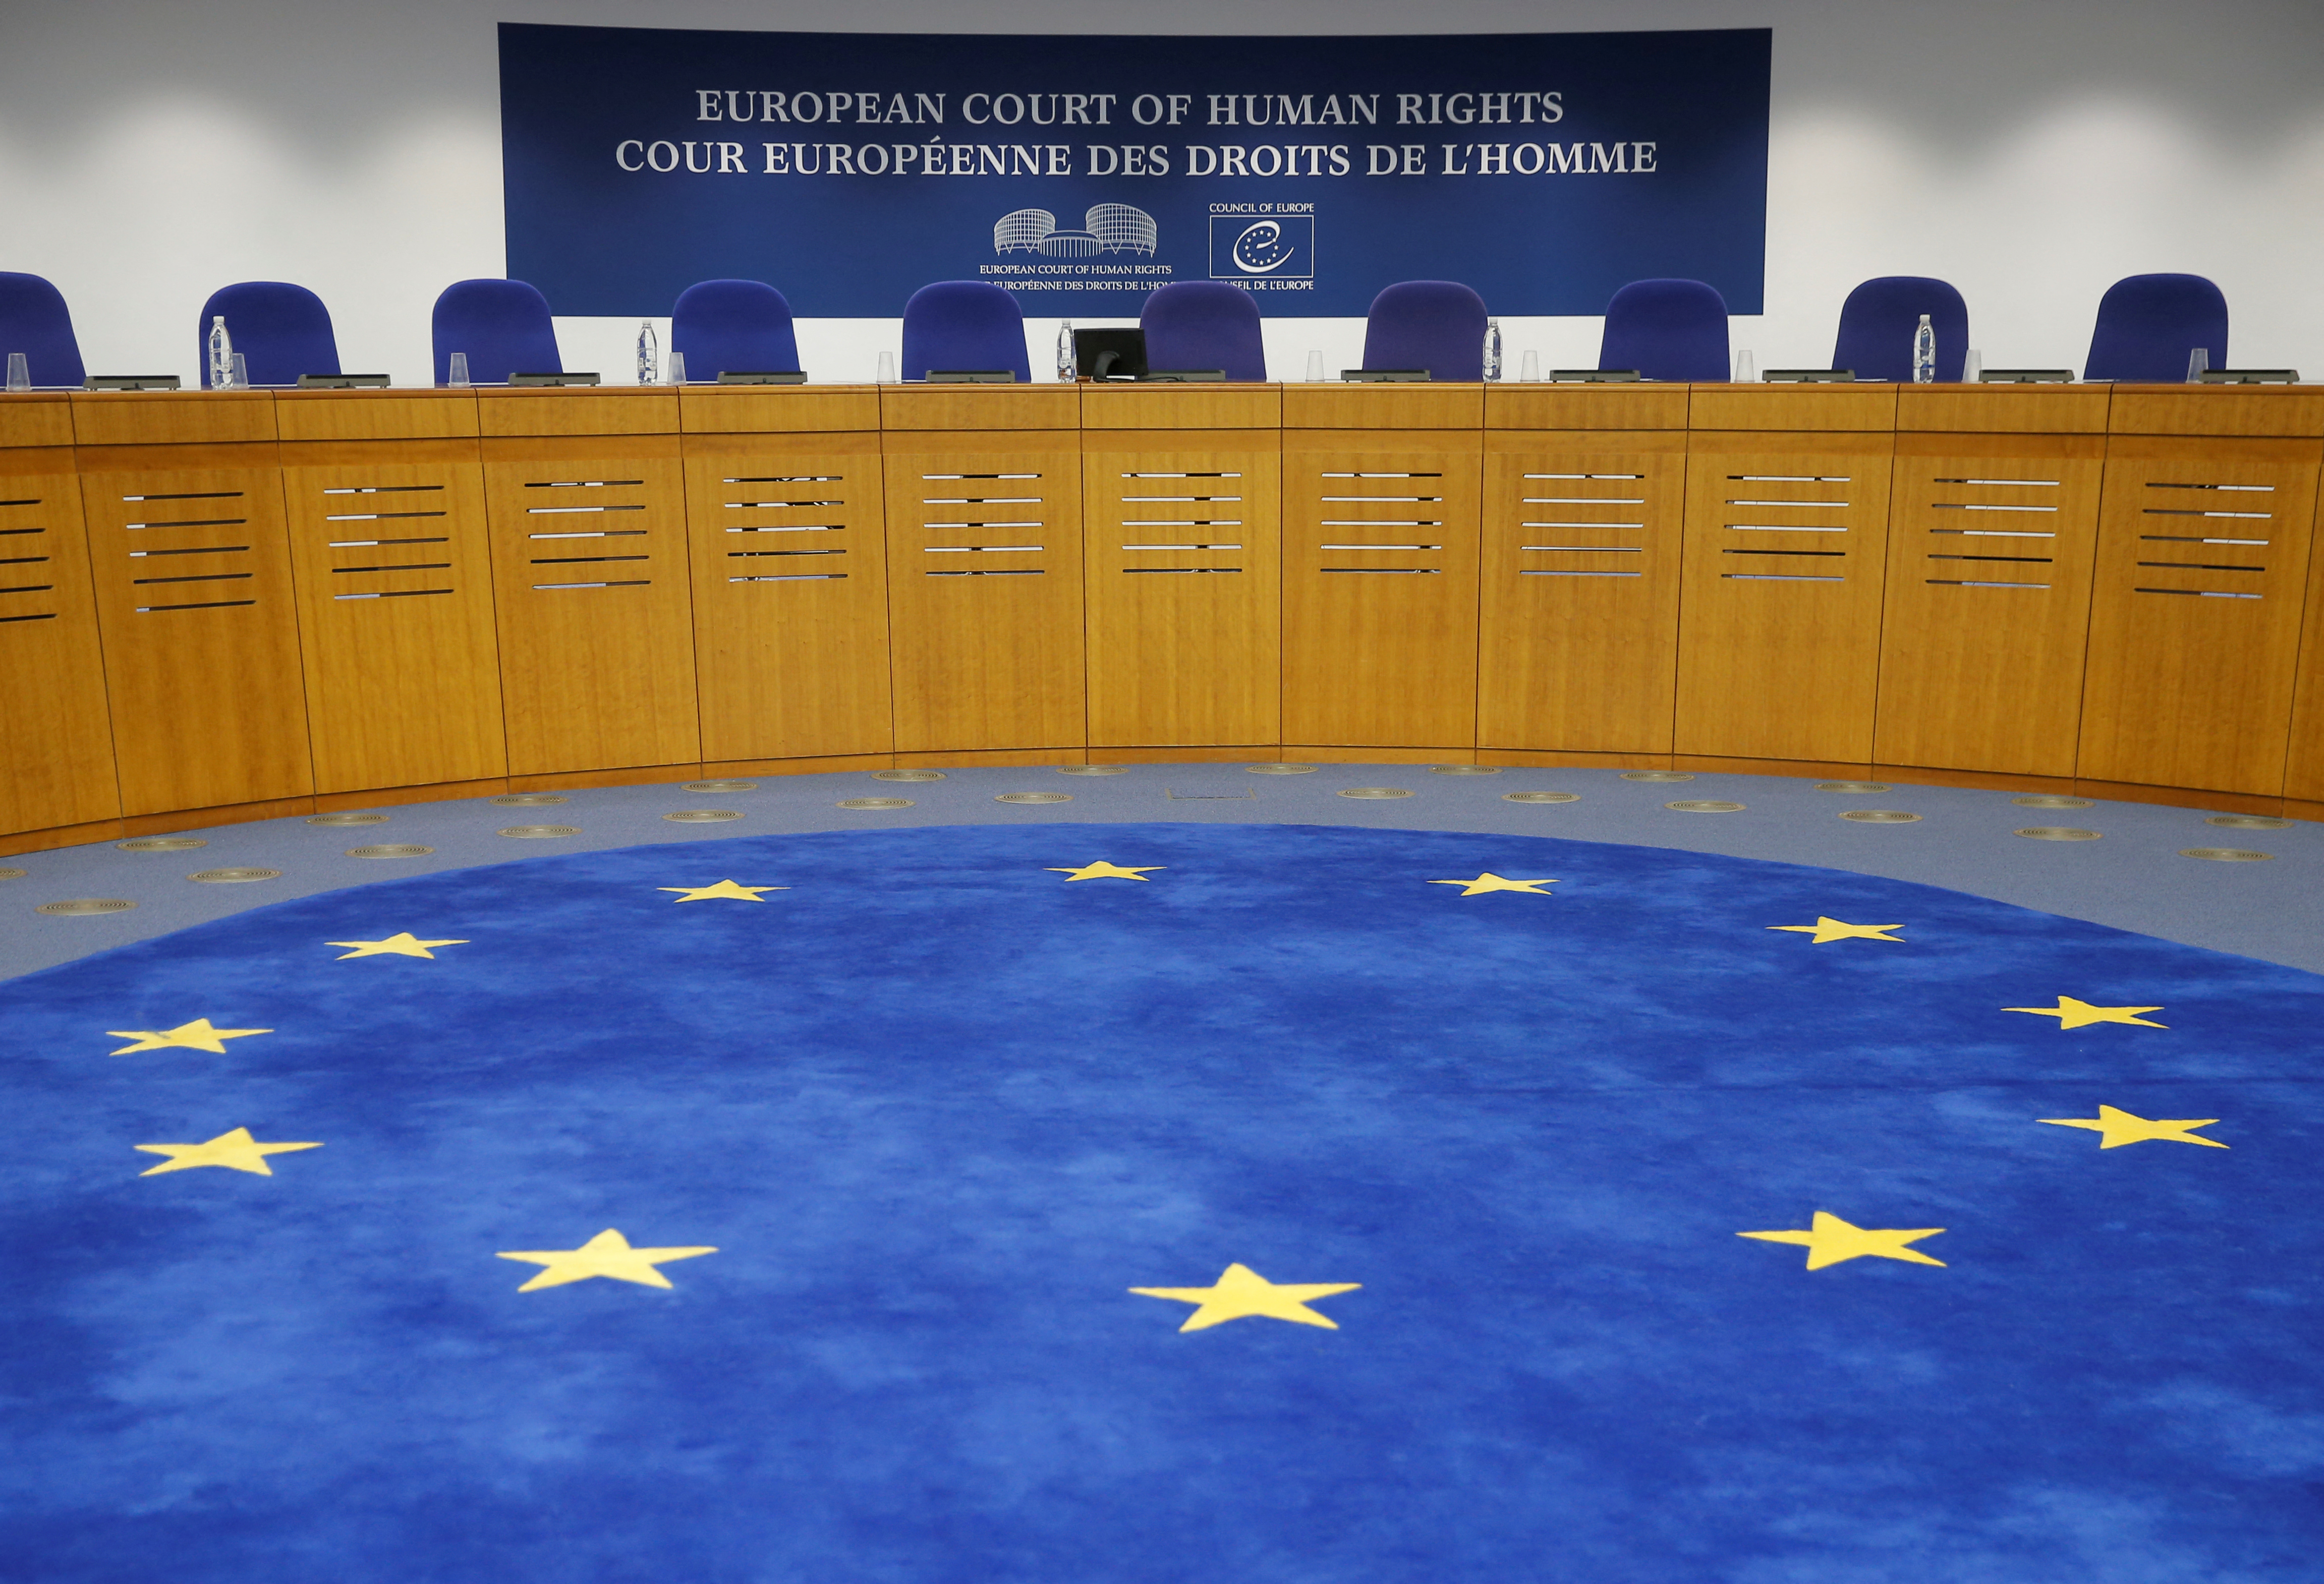 The courtroom of the European Court of Human Rights is seen ahead of the start of a hearing in Strasbourg